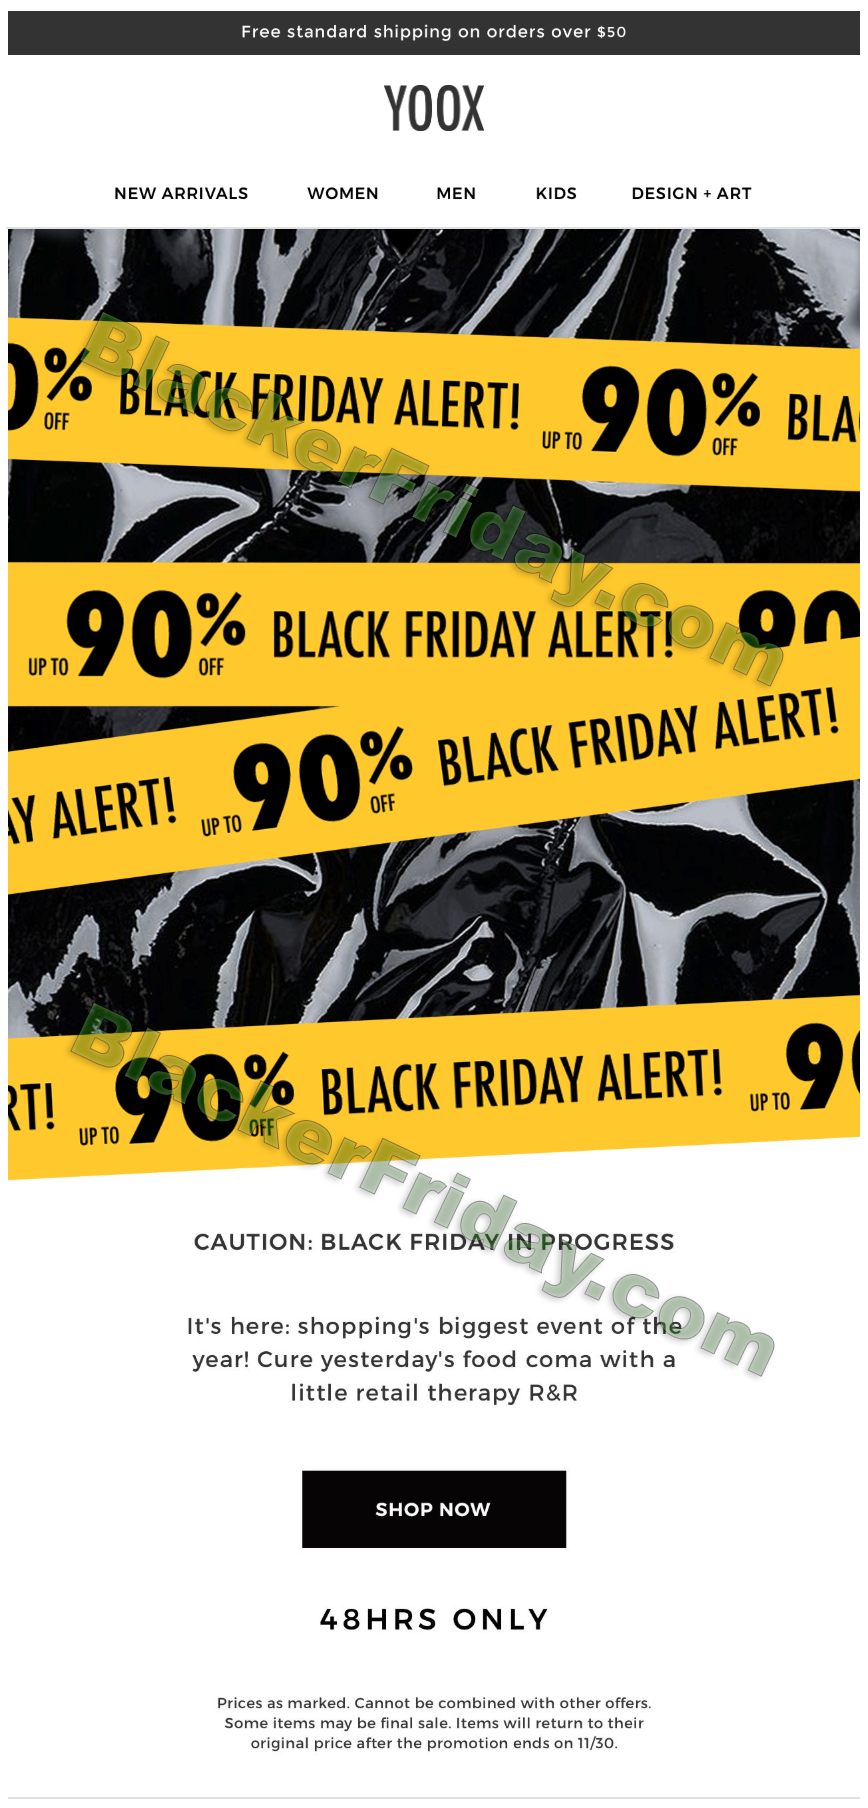 Yoox Black Friday 2020 Sale - What to Expect - Blacker Friday